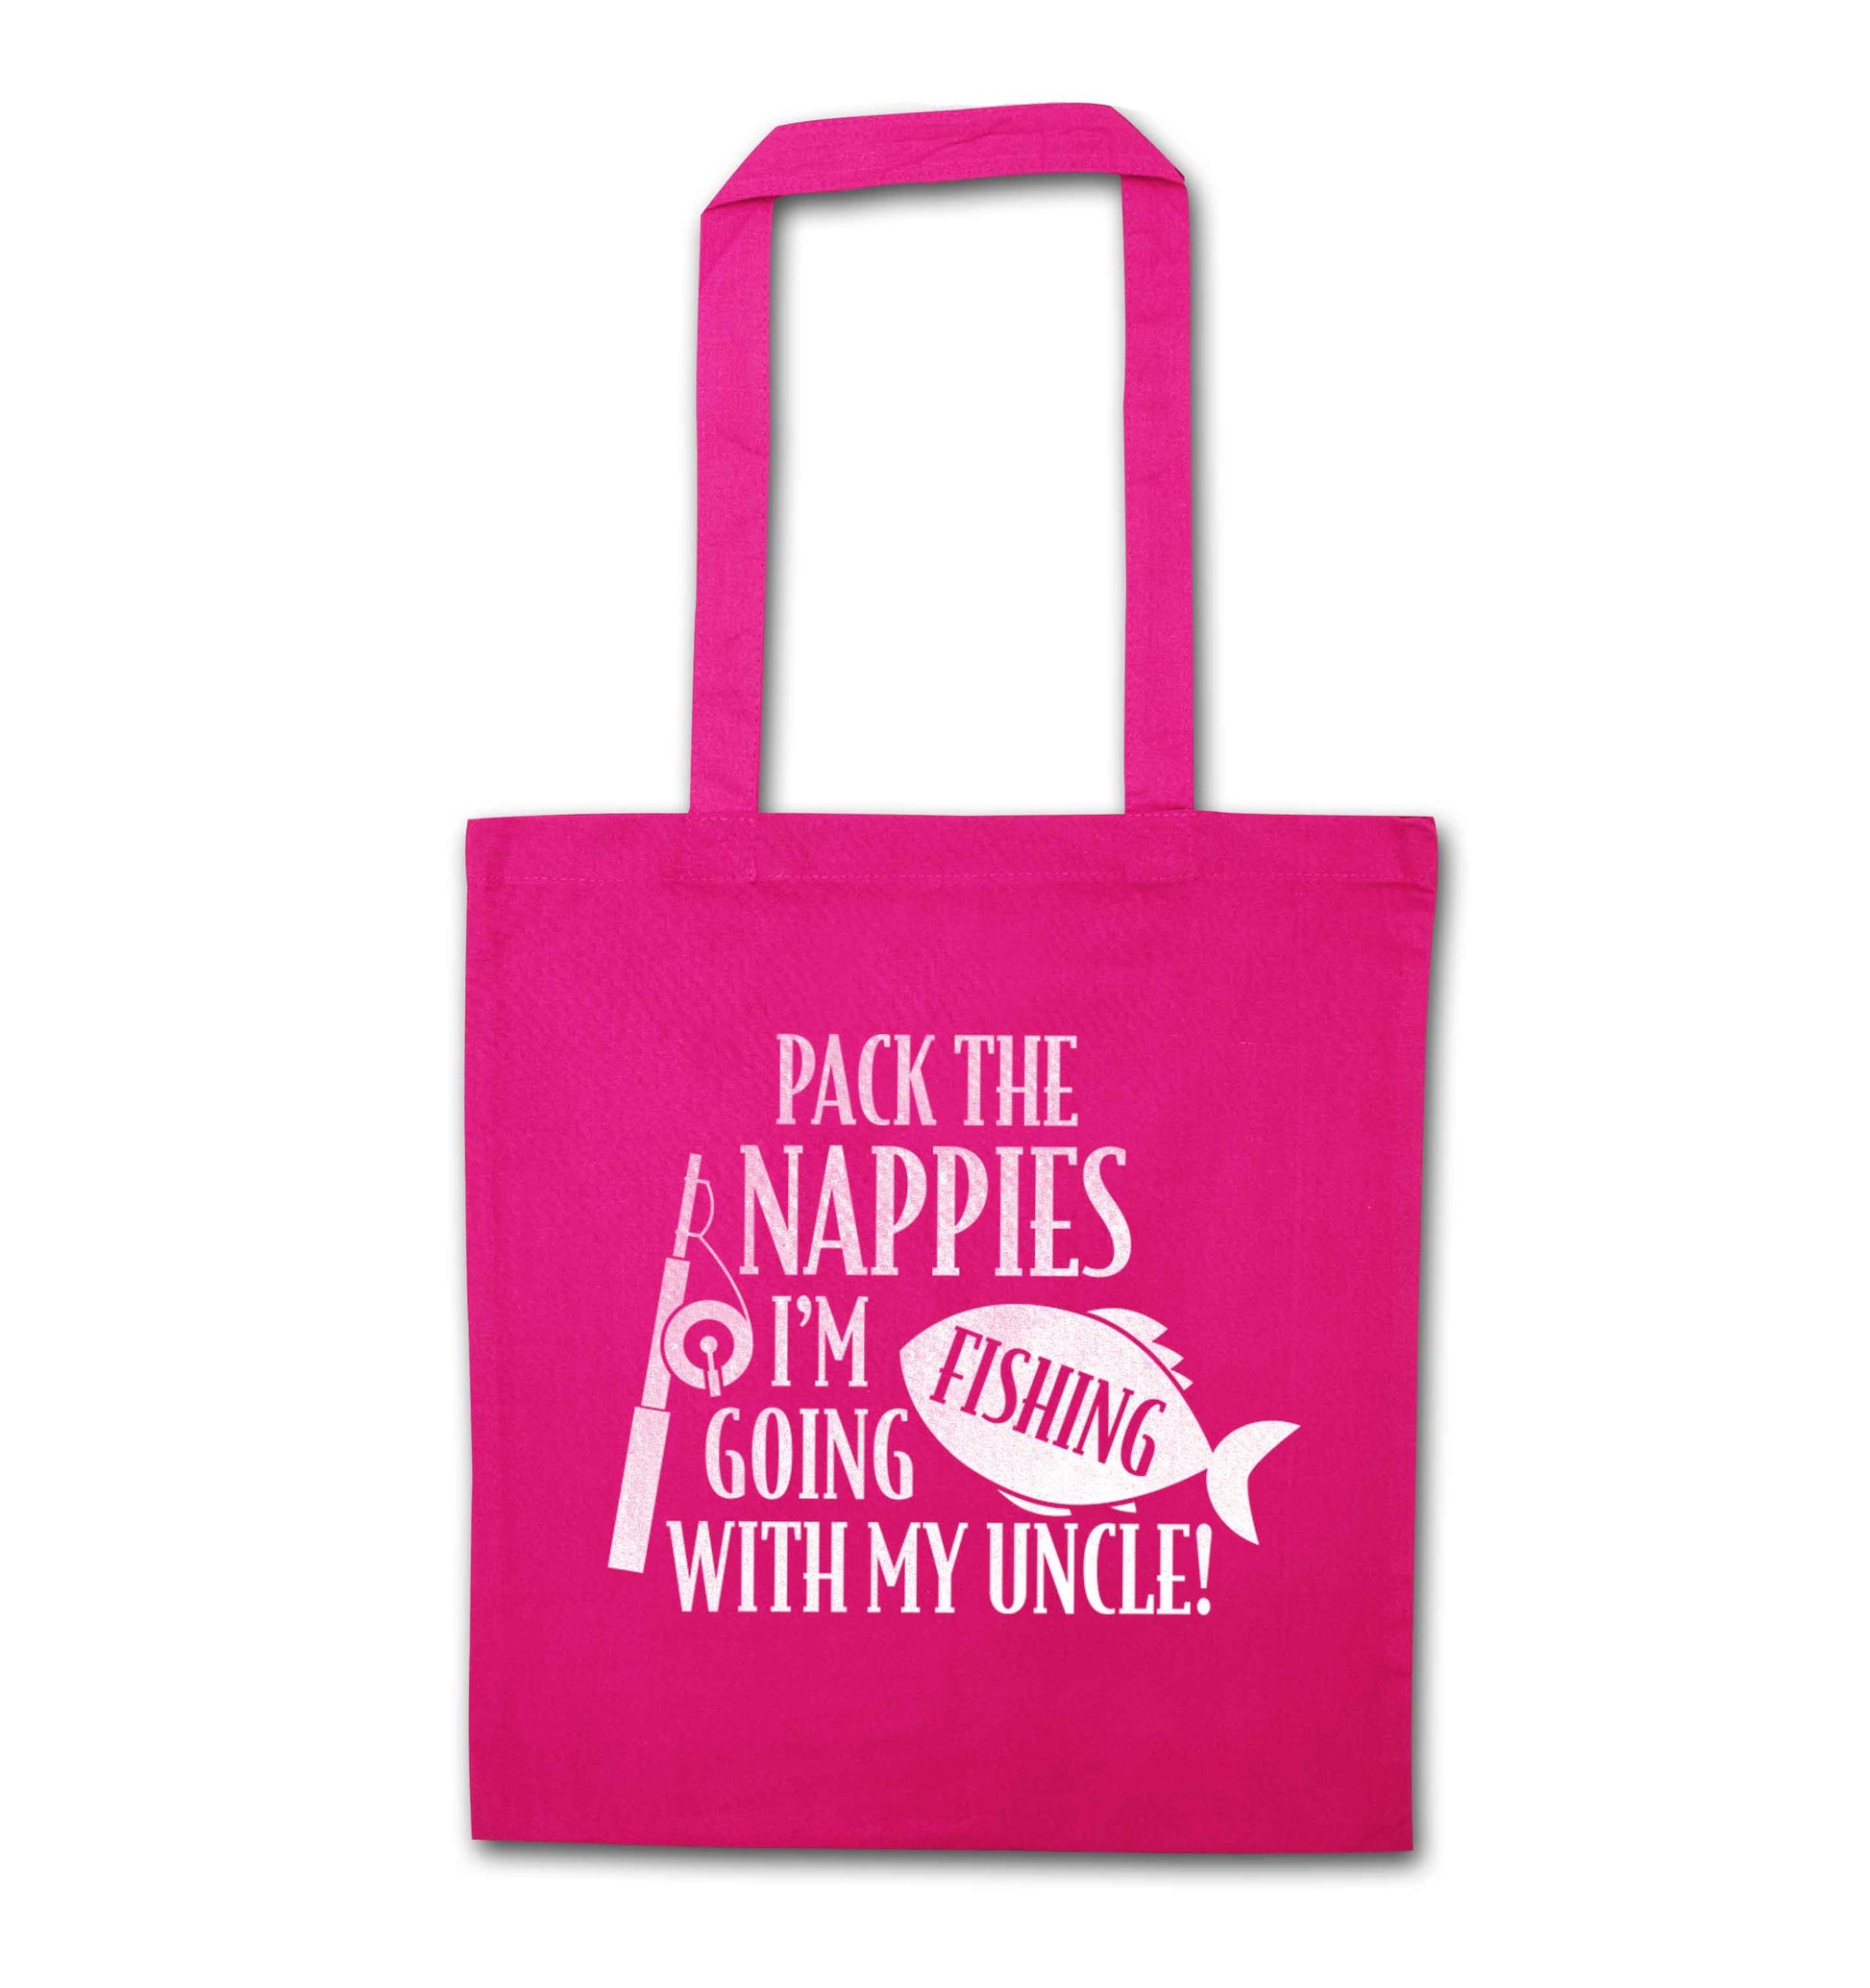 Pack the nappies I'm going fishing with my Uncle pink tote bag